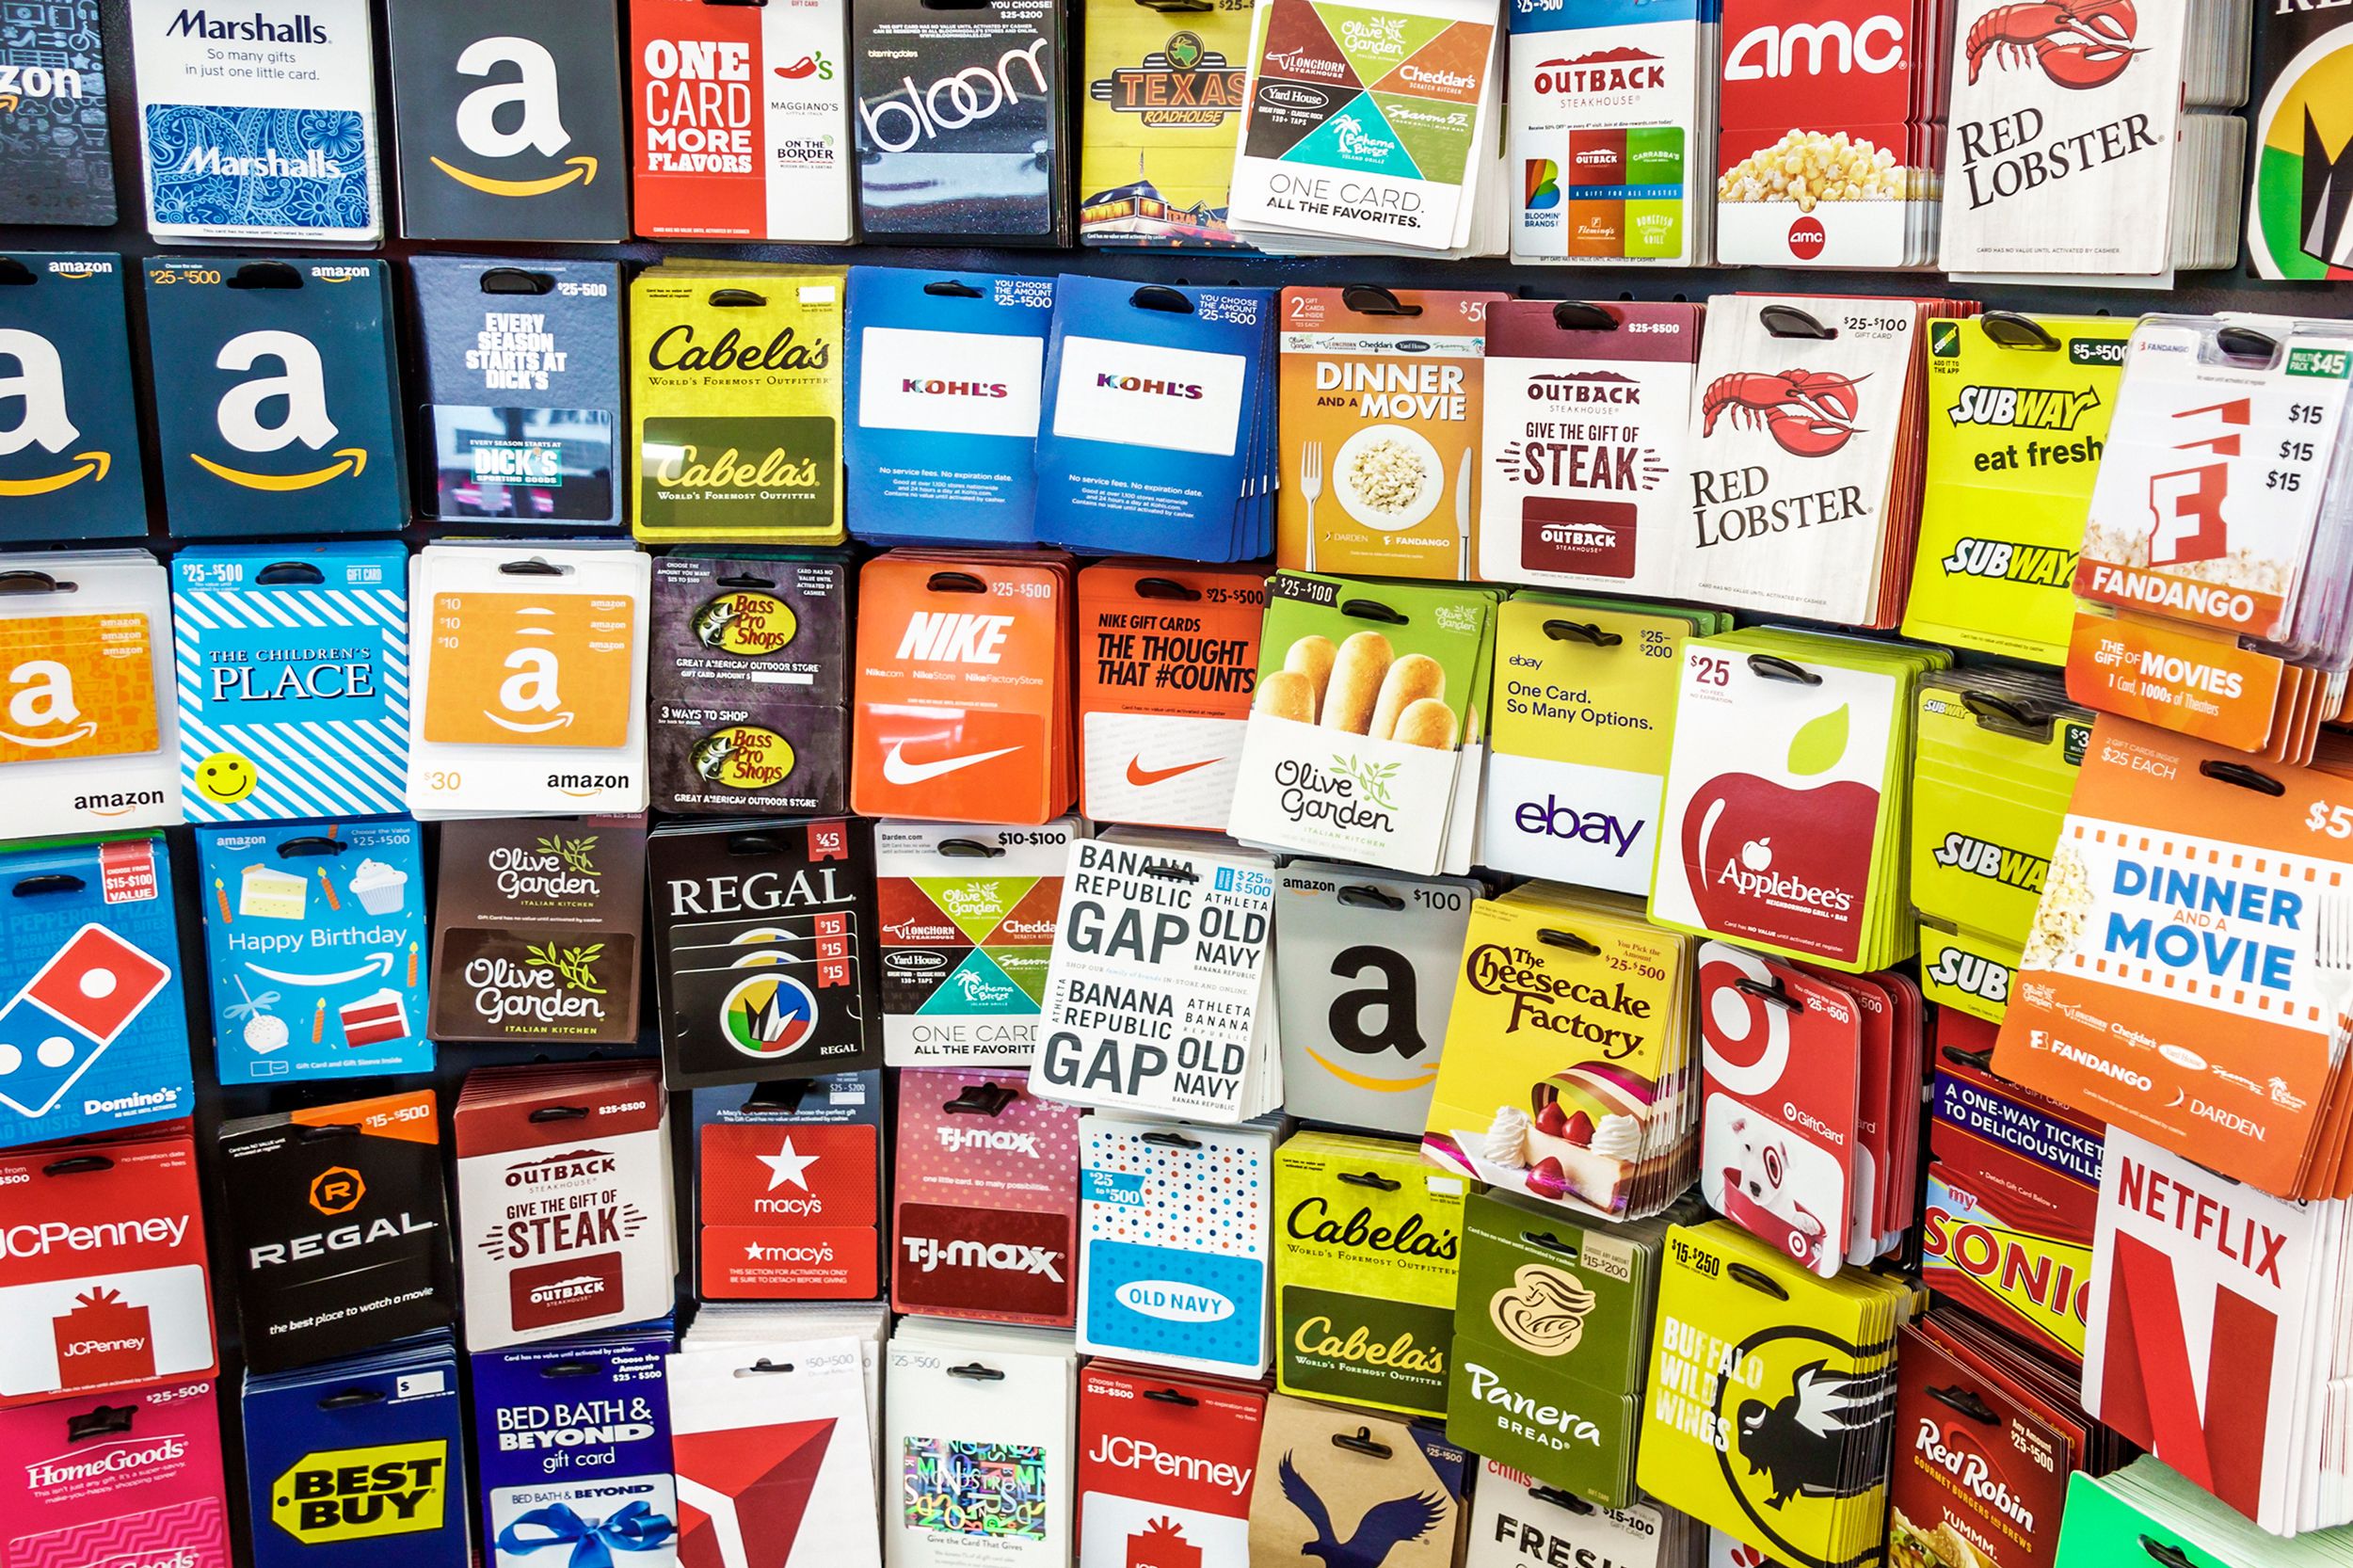 How To Convert an Amazon Gift Card to Cash